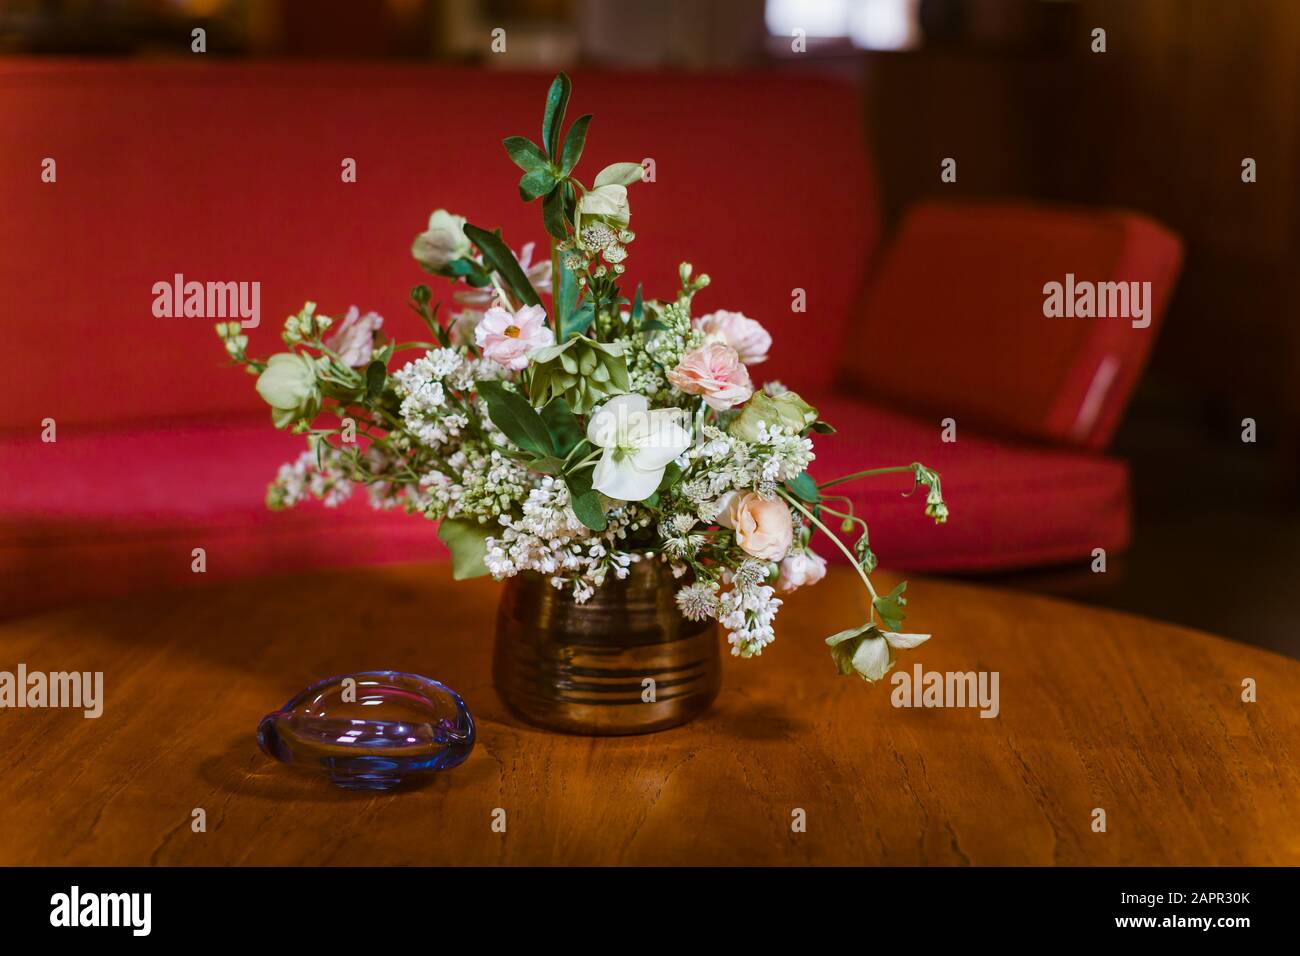 Small Bouquet Of Flowers On A Retro Vintage Wooden Table Stock Photo Alamy